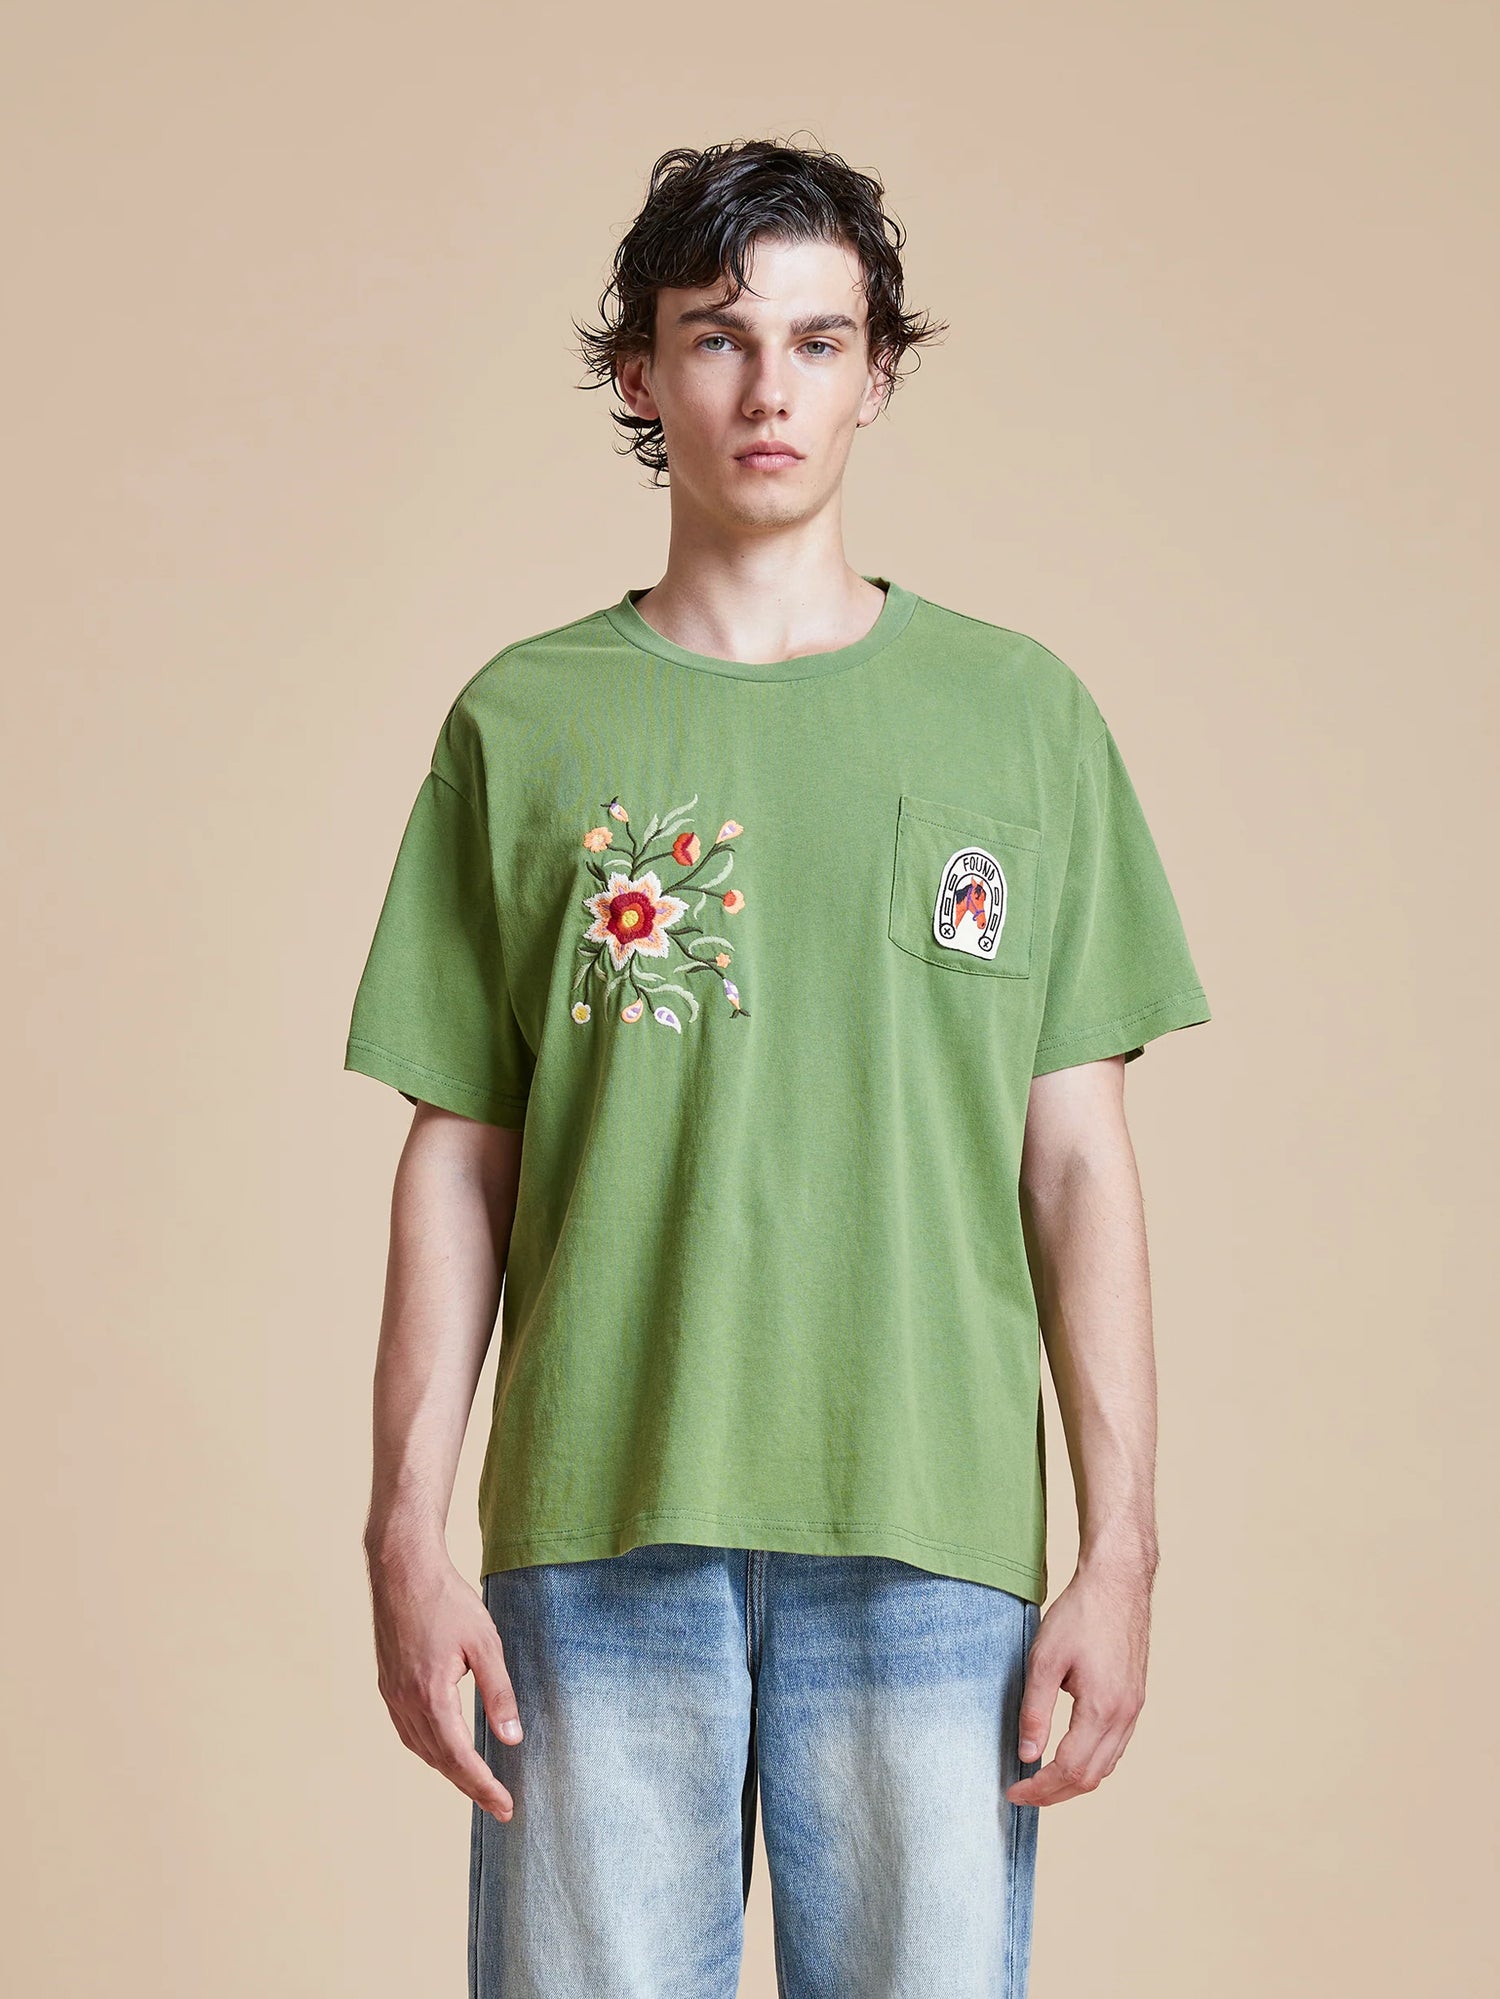 A man wearing a green Found Pine Needle Farm Tee and jeans.